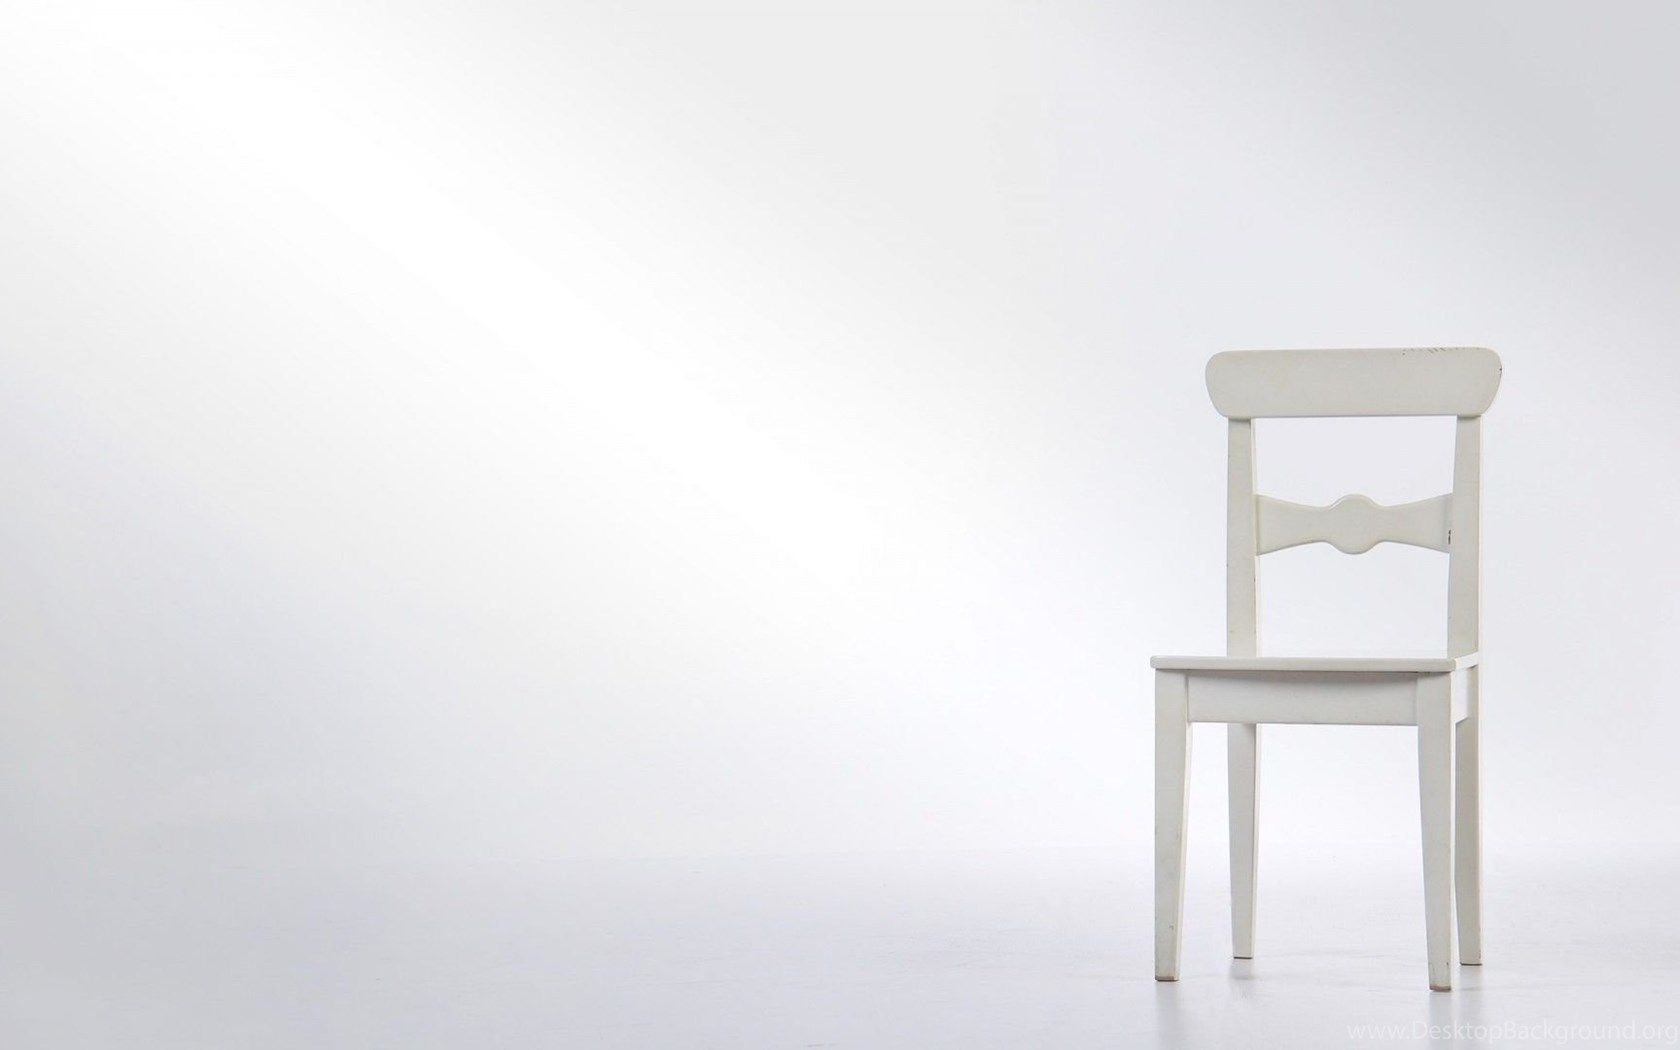 A White Chair In A White Room HD Wallpaper MixHD Wallpaper Desktop Background